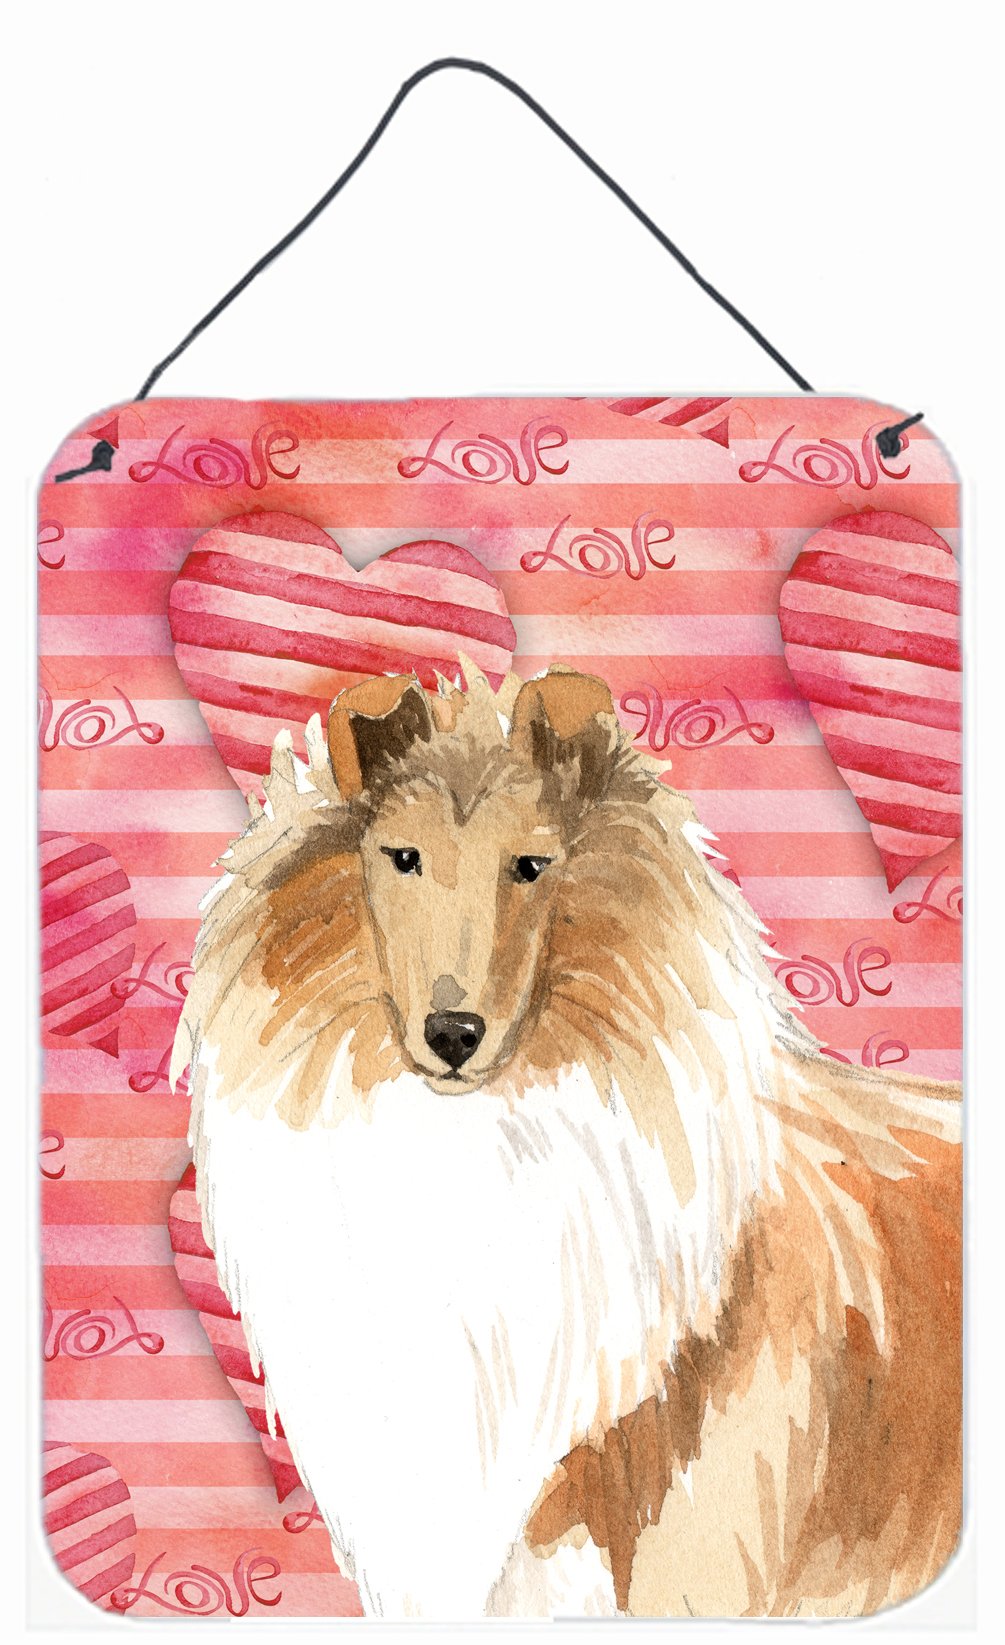 Love a Rough Collie Wall or Door Hanging Prints CK1756DS1216 by Caroline's Treasures